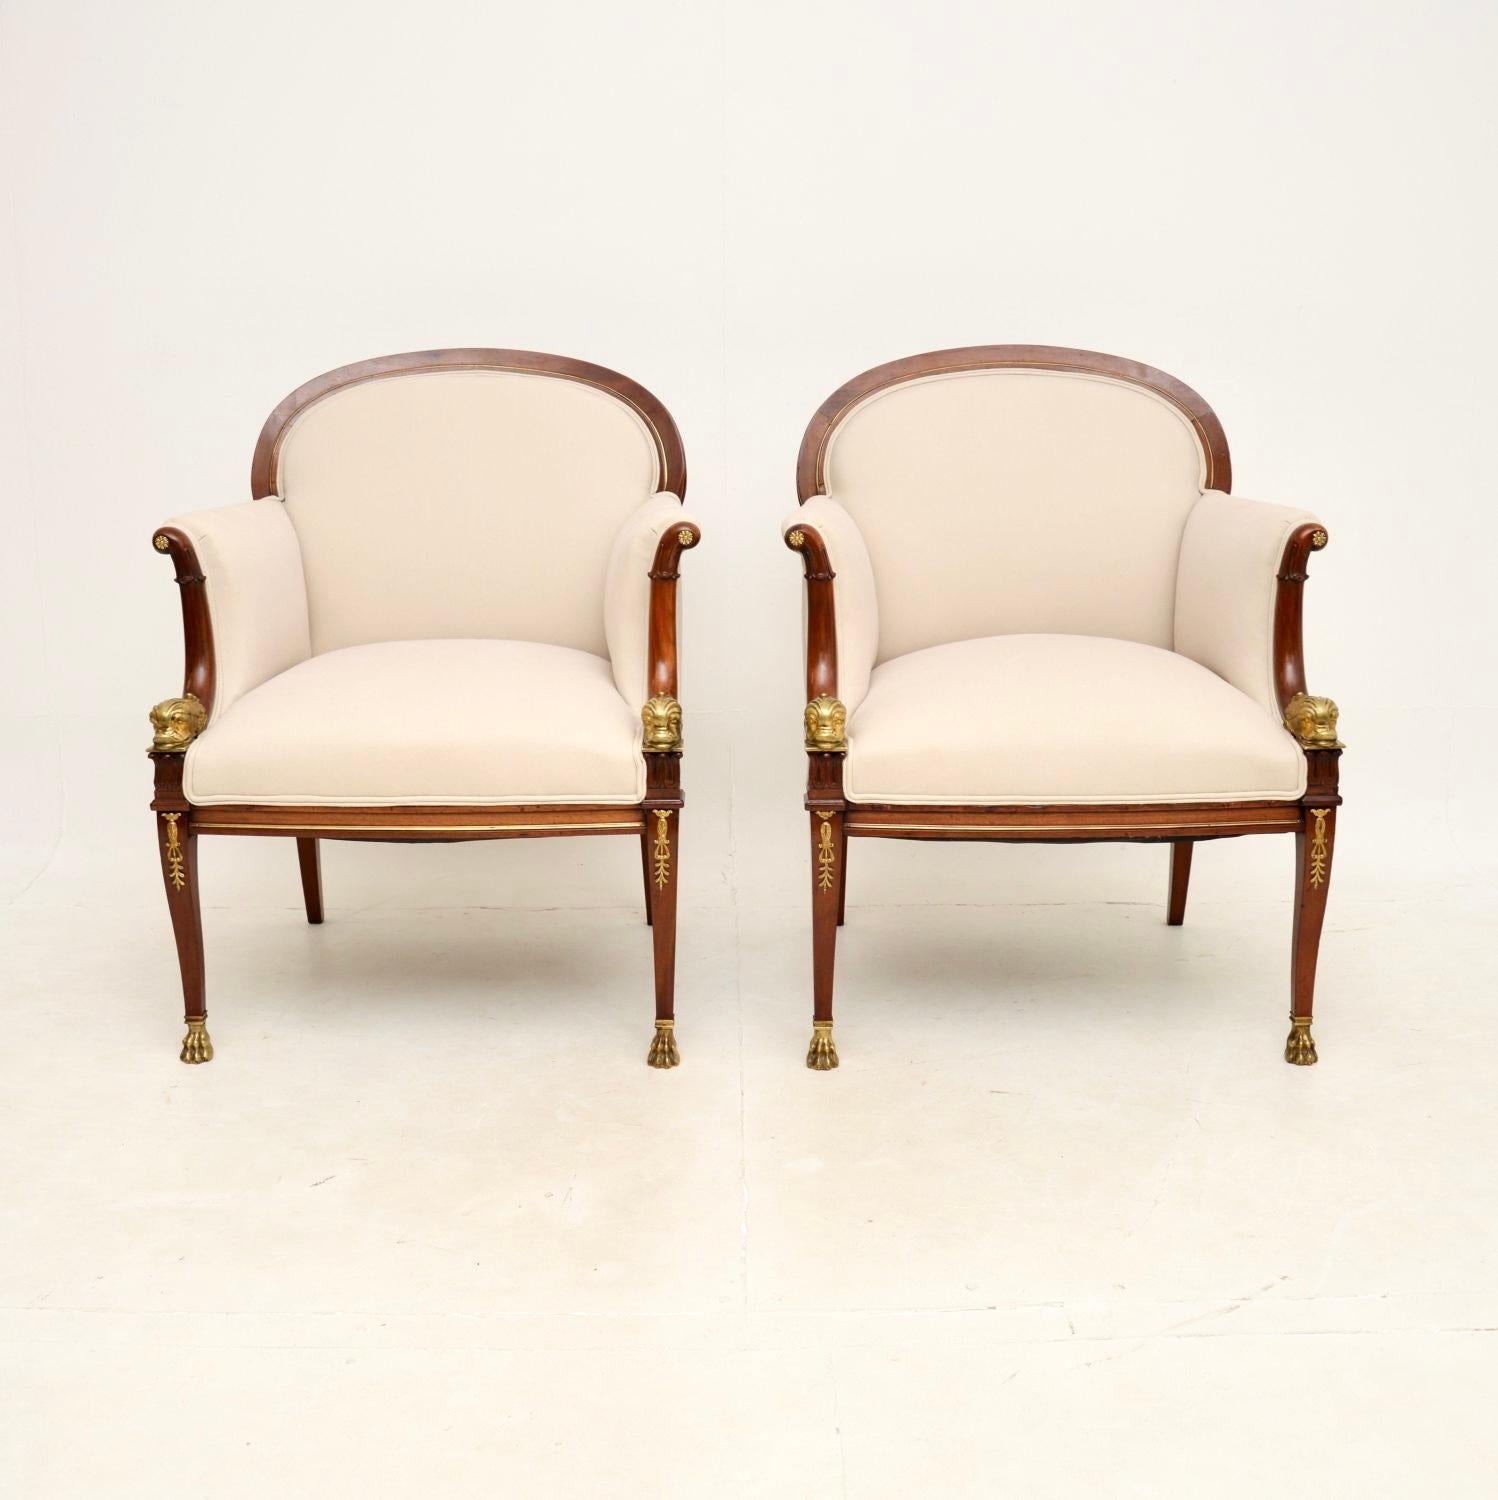 A magnificent pair of antique Regency Style armchairs. They were recently imported from Sweden, and they date from around the 1880-1900 period.

The quality is outstanding and they have an absolutely gorgeous design. There are fantastic gilt bronze